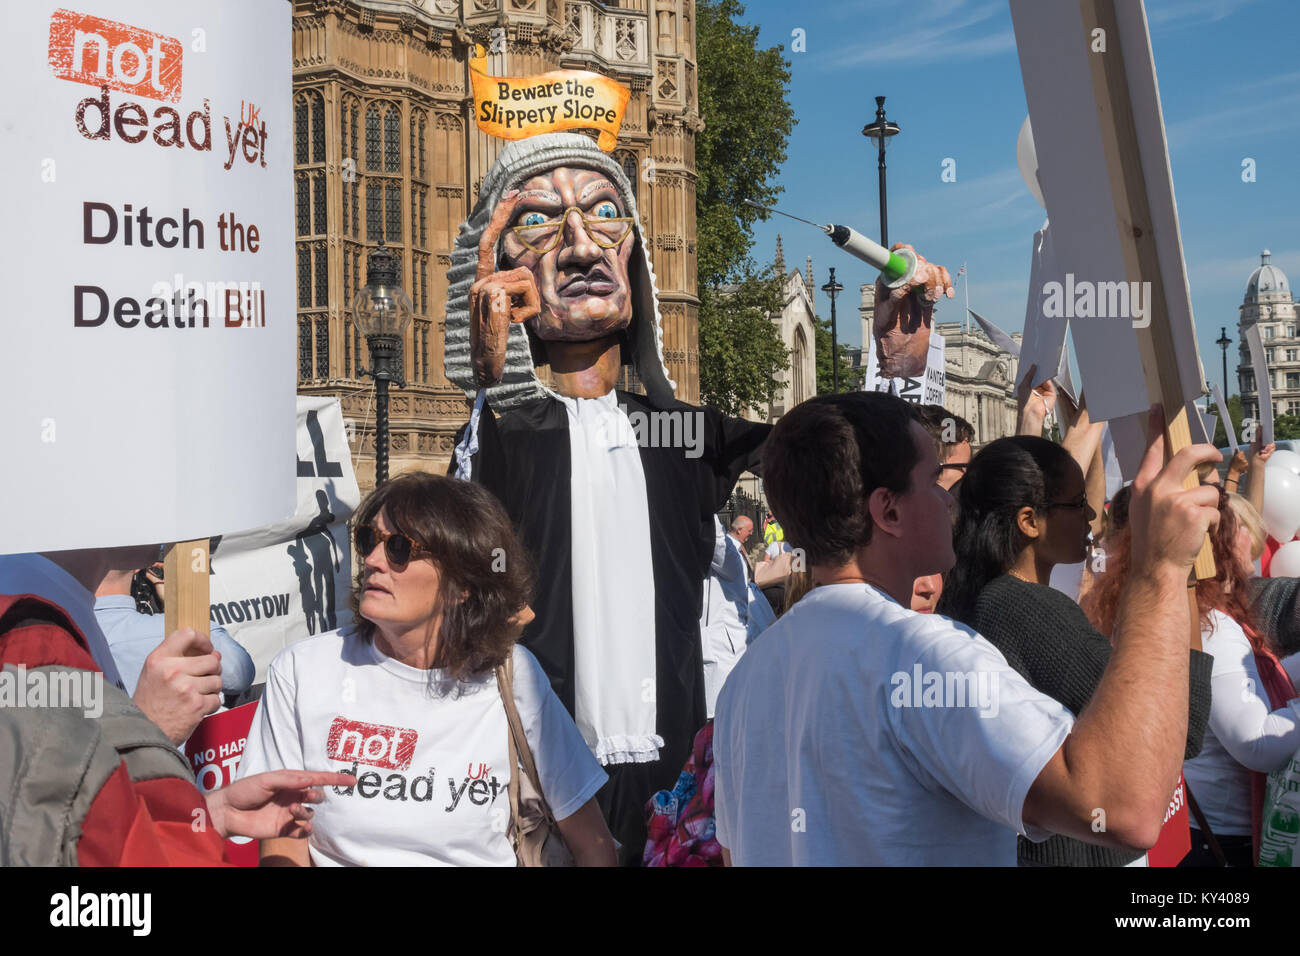 Protesters in Old Palace Yard calling for a NO vote on the Assisted Suicide Bill being debated in Parliament had brought a giant puppet judge with a syringe and the message 'Beware the Slippery Slope'. Stock Photo